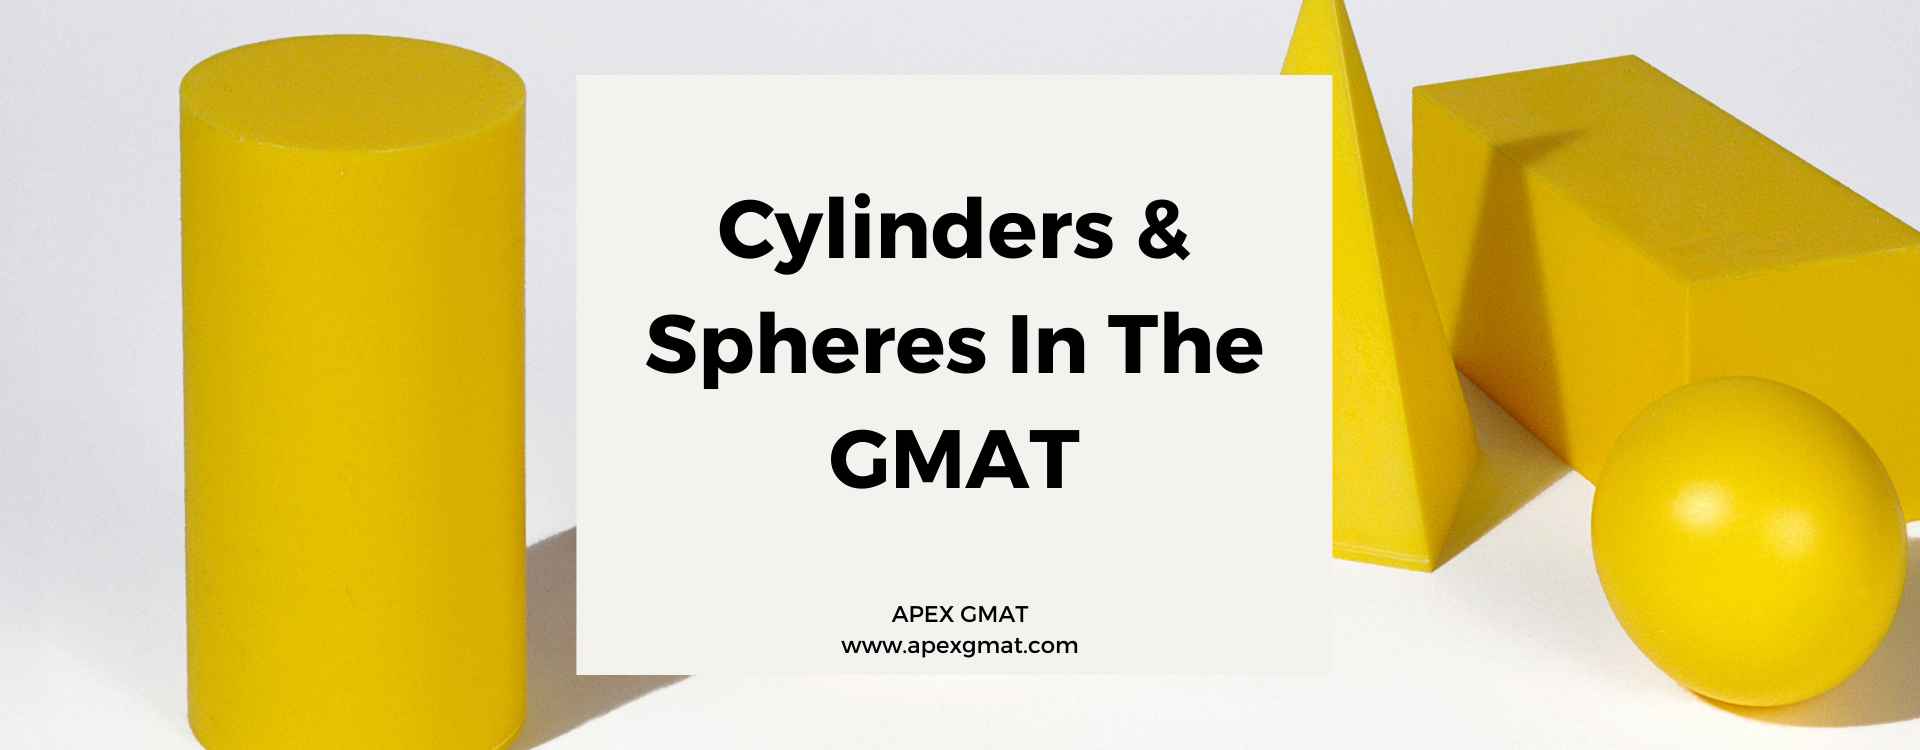 Cylinders & Spheres In The GMAT